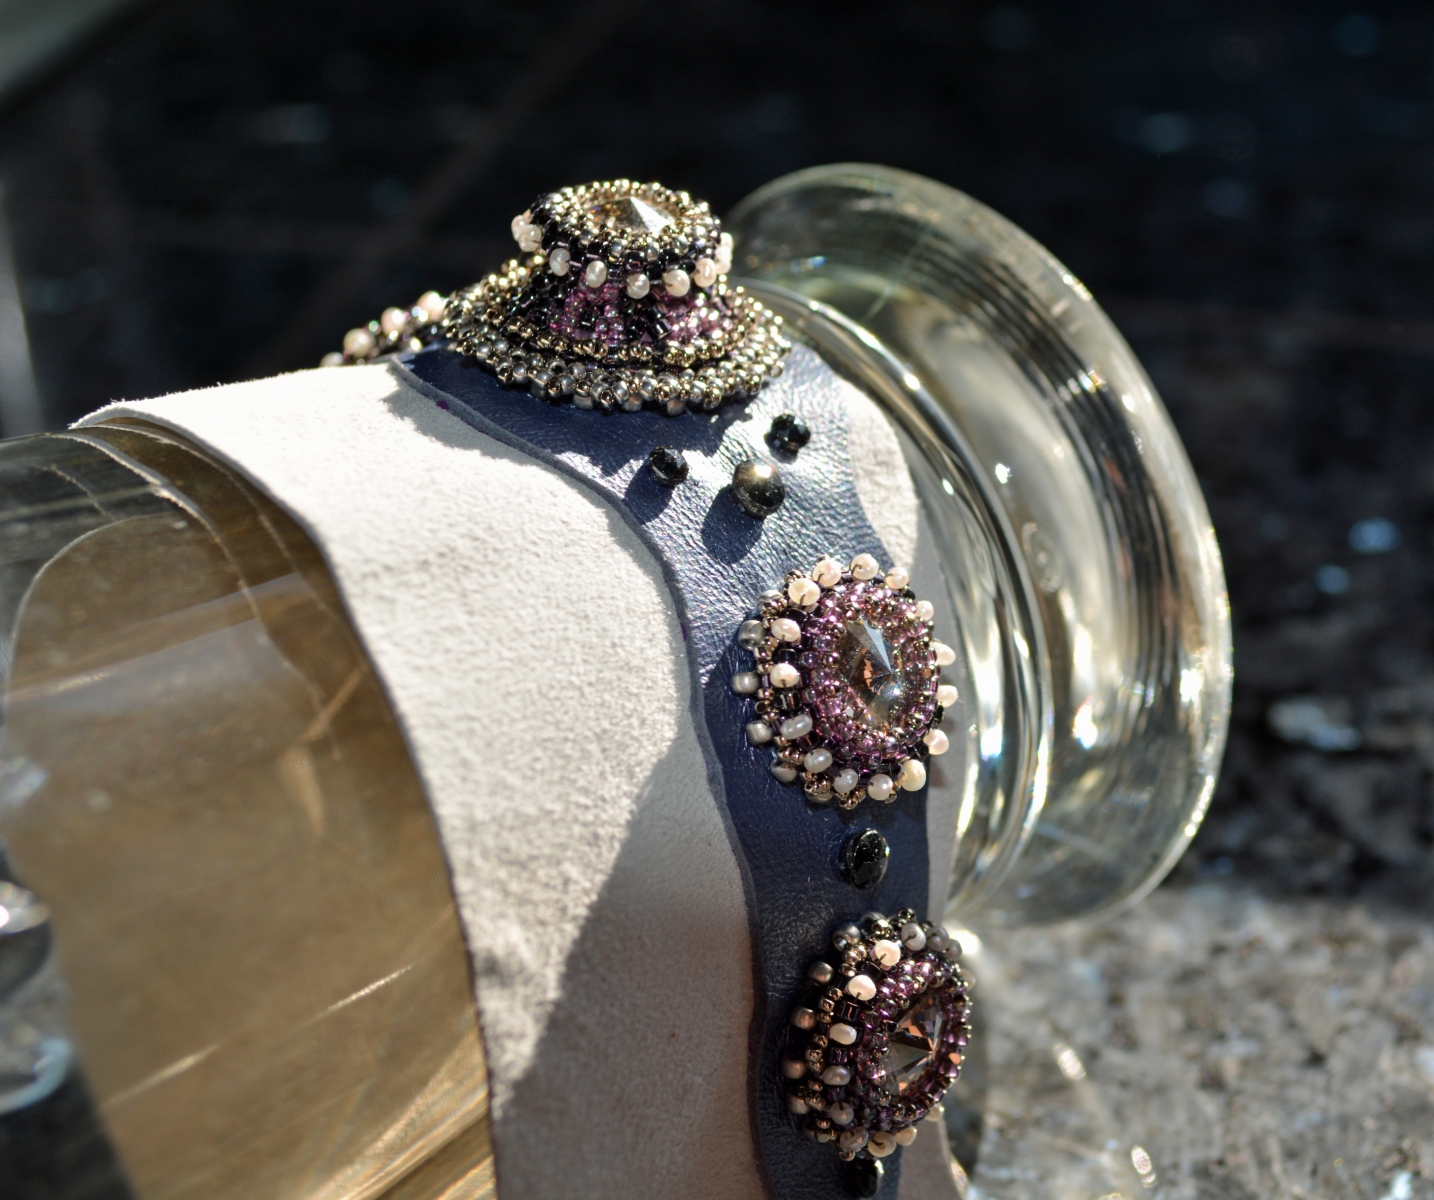 Smart cuff designed by Laura McCabe; stitched and beaded by Janet Bocciardi